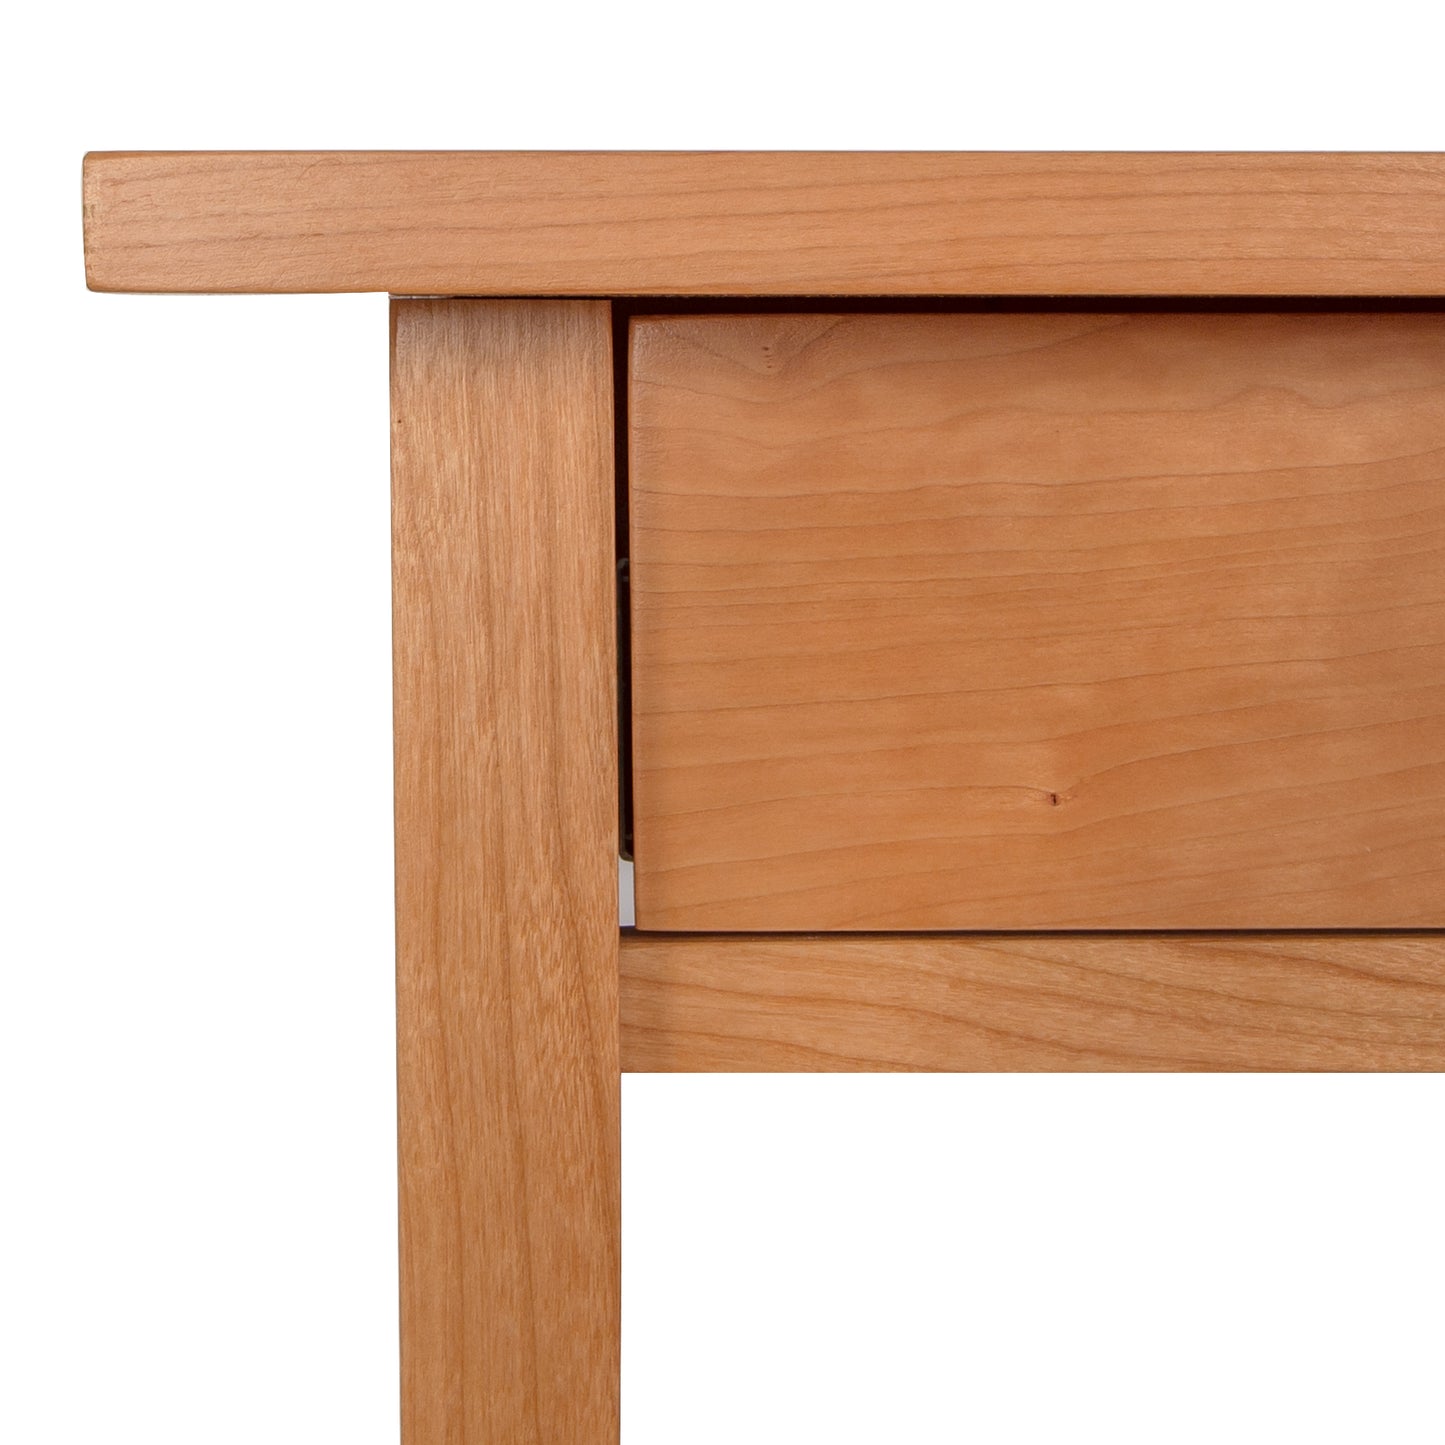 A close-up of a Lyndon Furniture Shaker 1-Drawer Nightstand with a drawer.